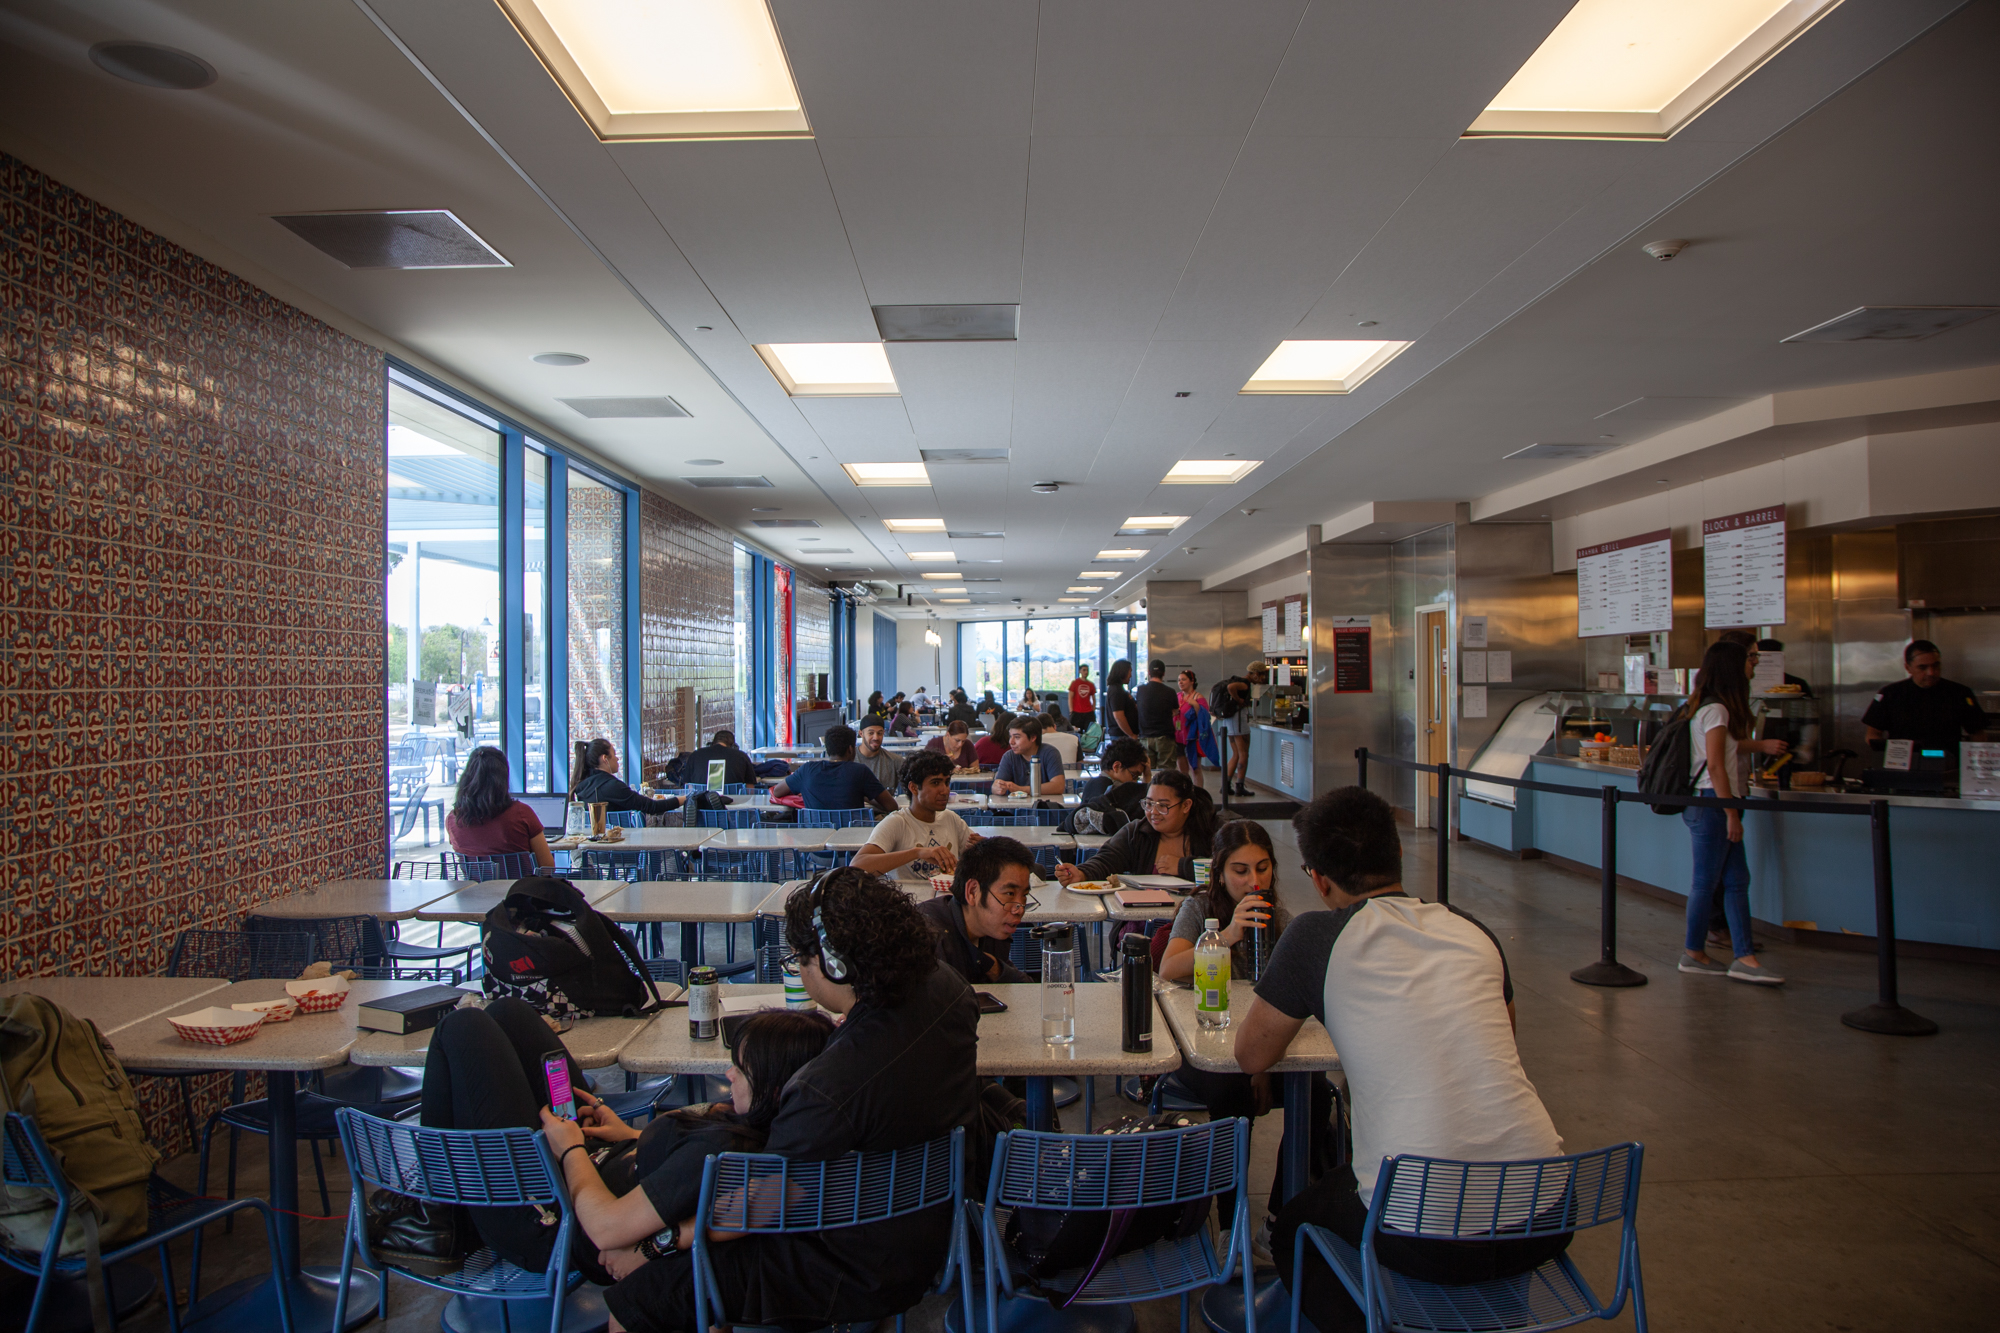 Give the students more food options